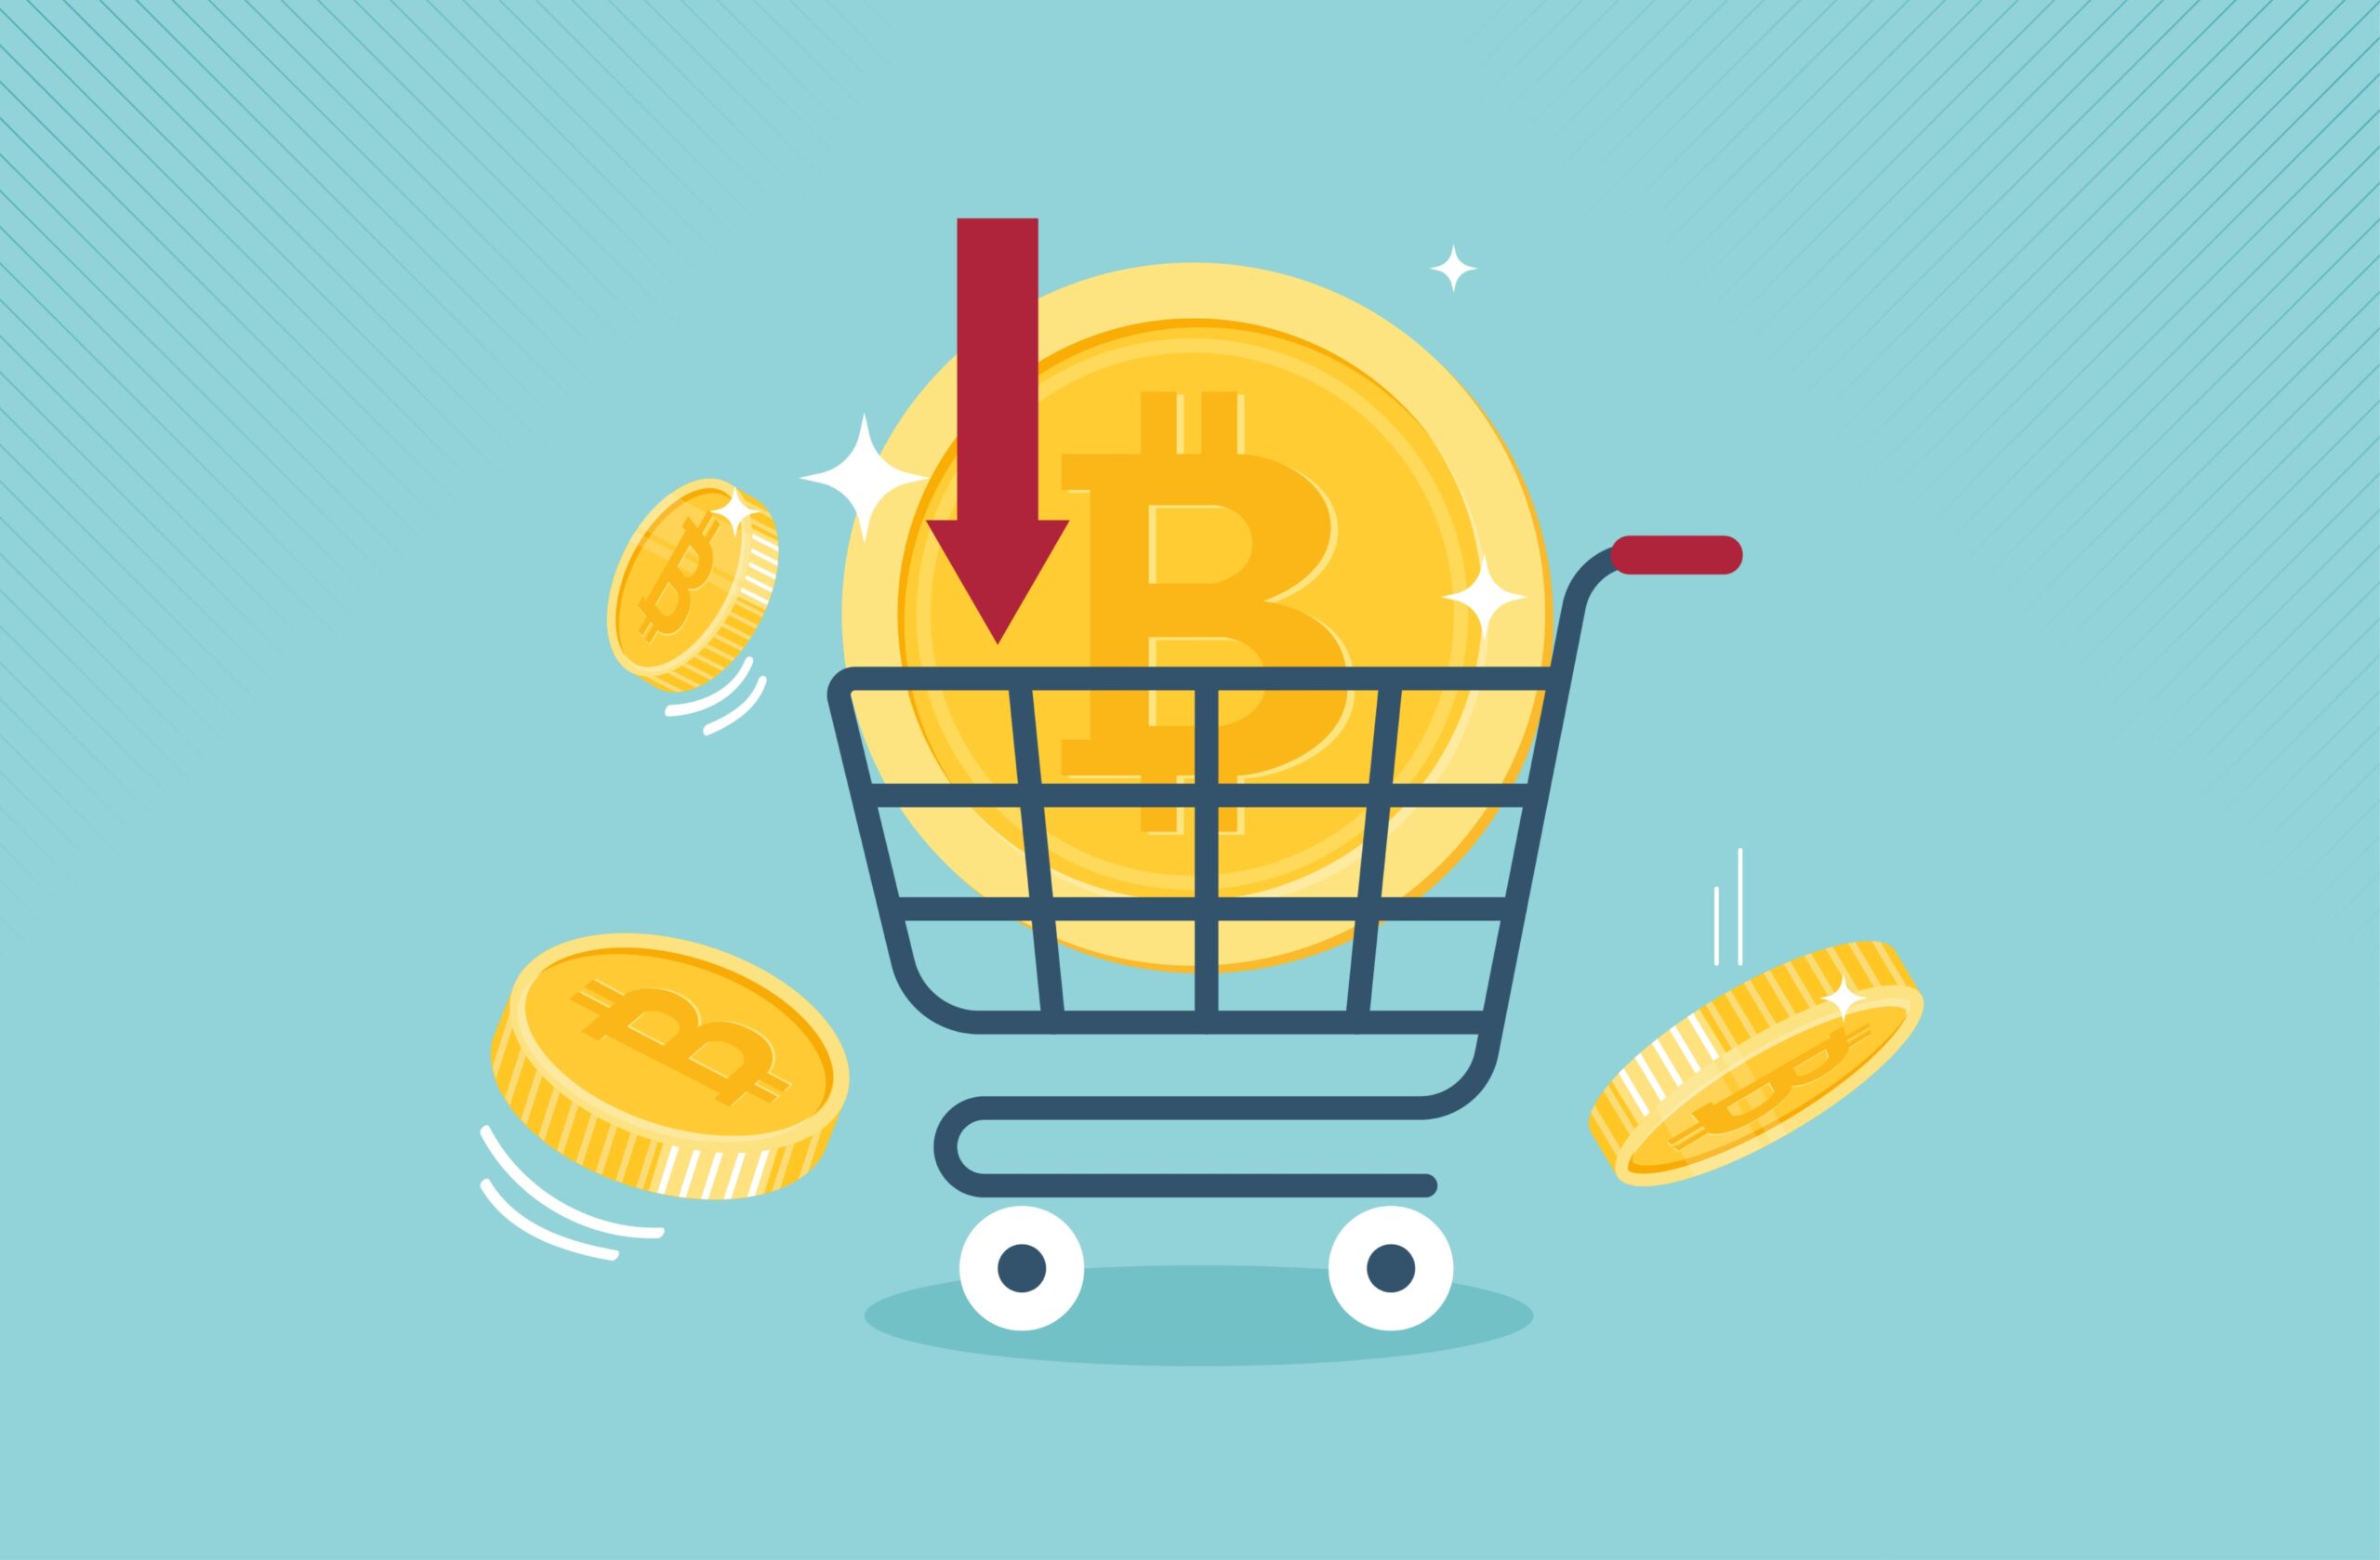 Buying Bitcoin on sale when price crash to make profit concept, smart man buying purchasing crypto currency Bitcoin in shopping cart trolley to speculate earning in the future.